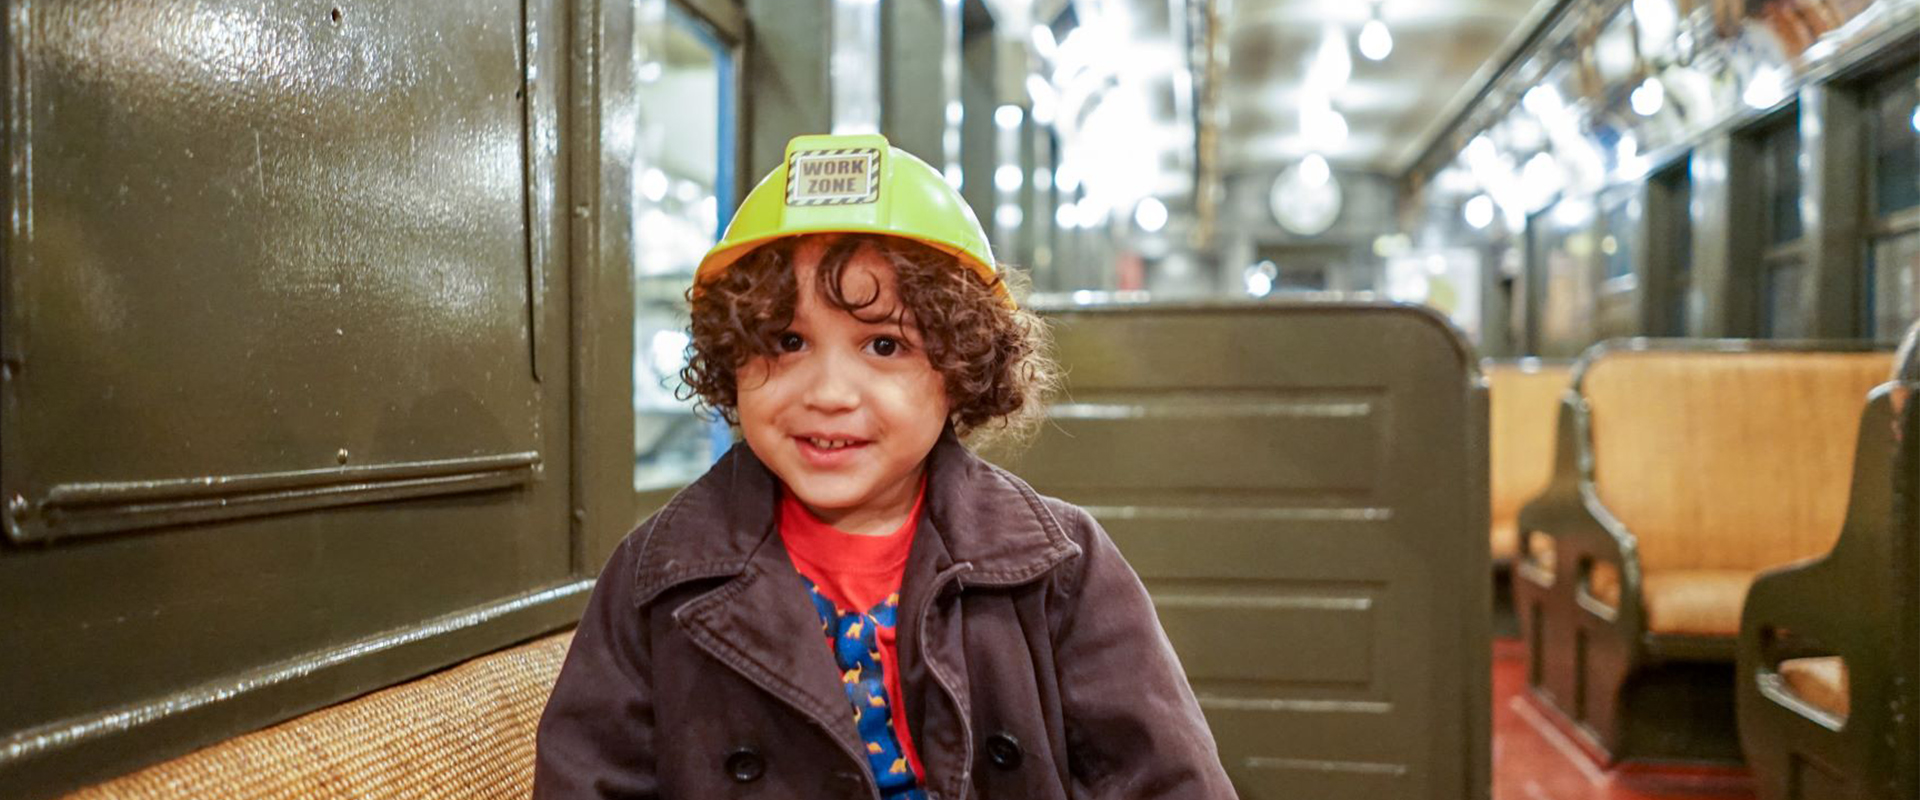 Young child smiles on old Elevated Train wearing yellow construction hat.